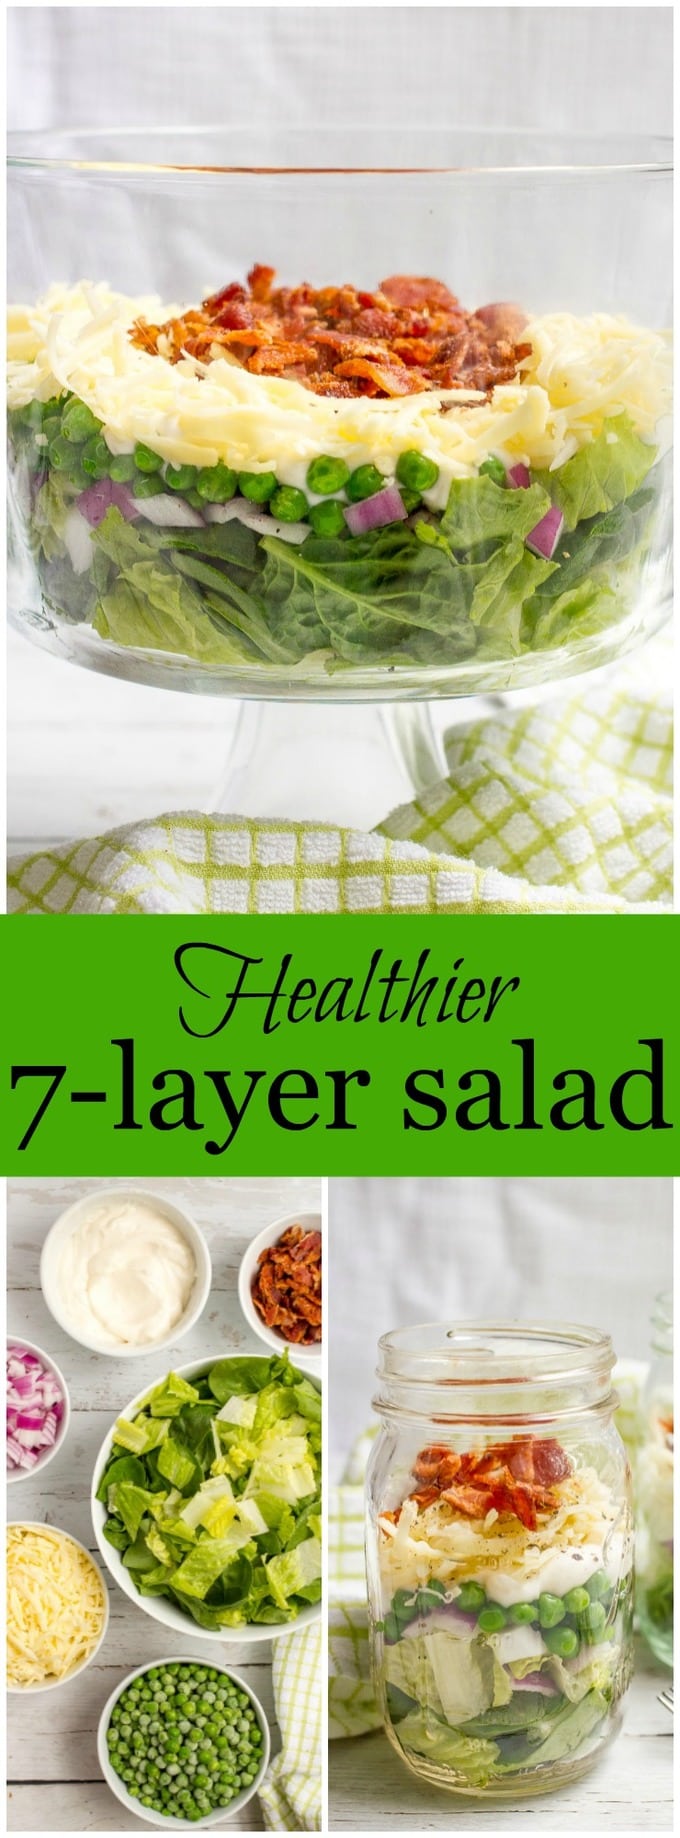 Healthier 7 layer salad - a lightened up version of this Southern salad classic - great side for summer picnics, potlucks and BBQ parties!